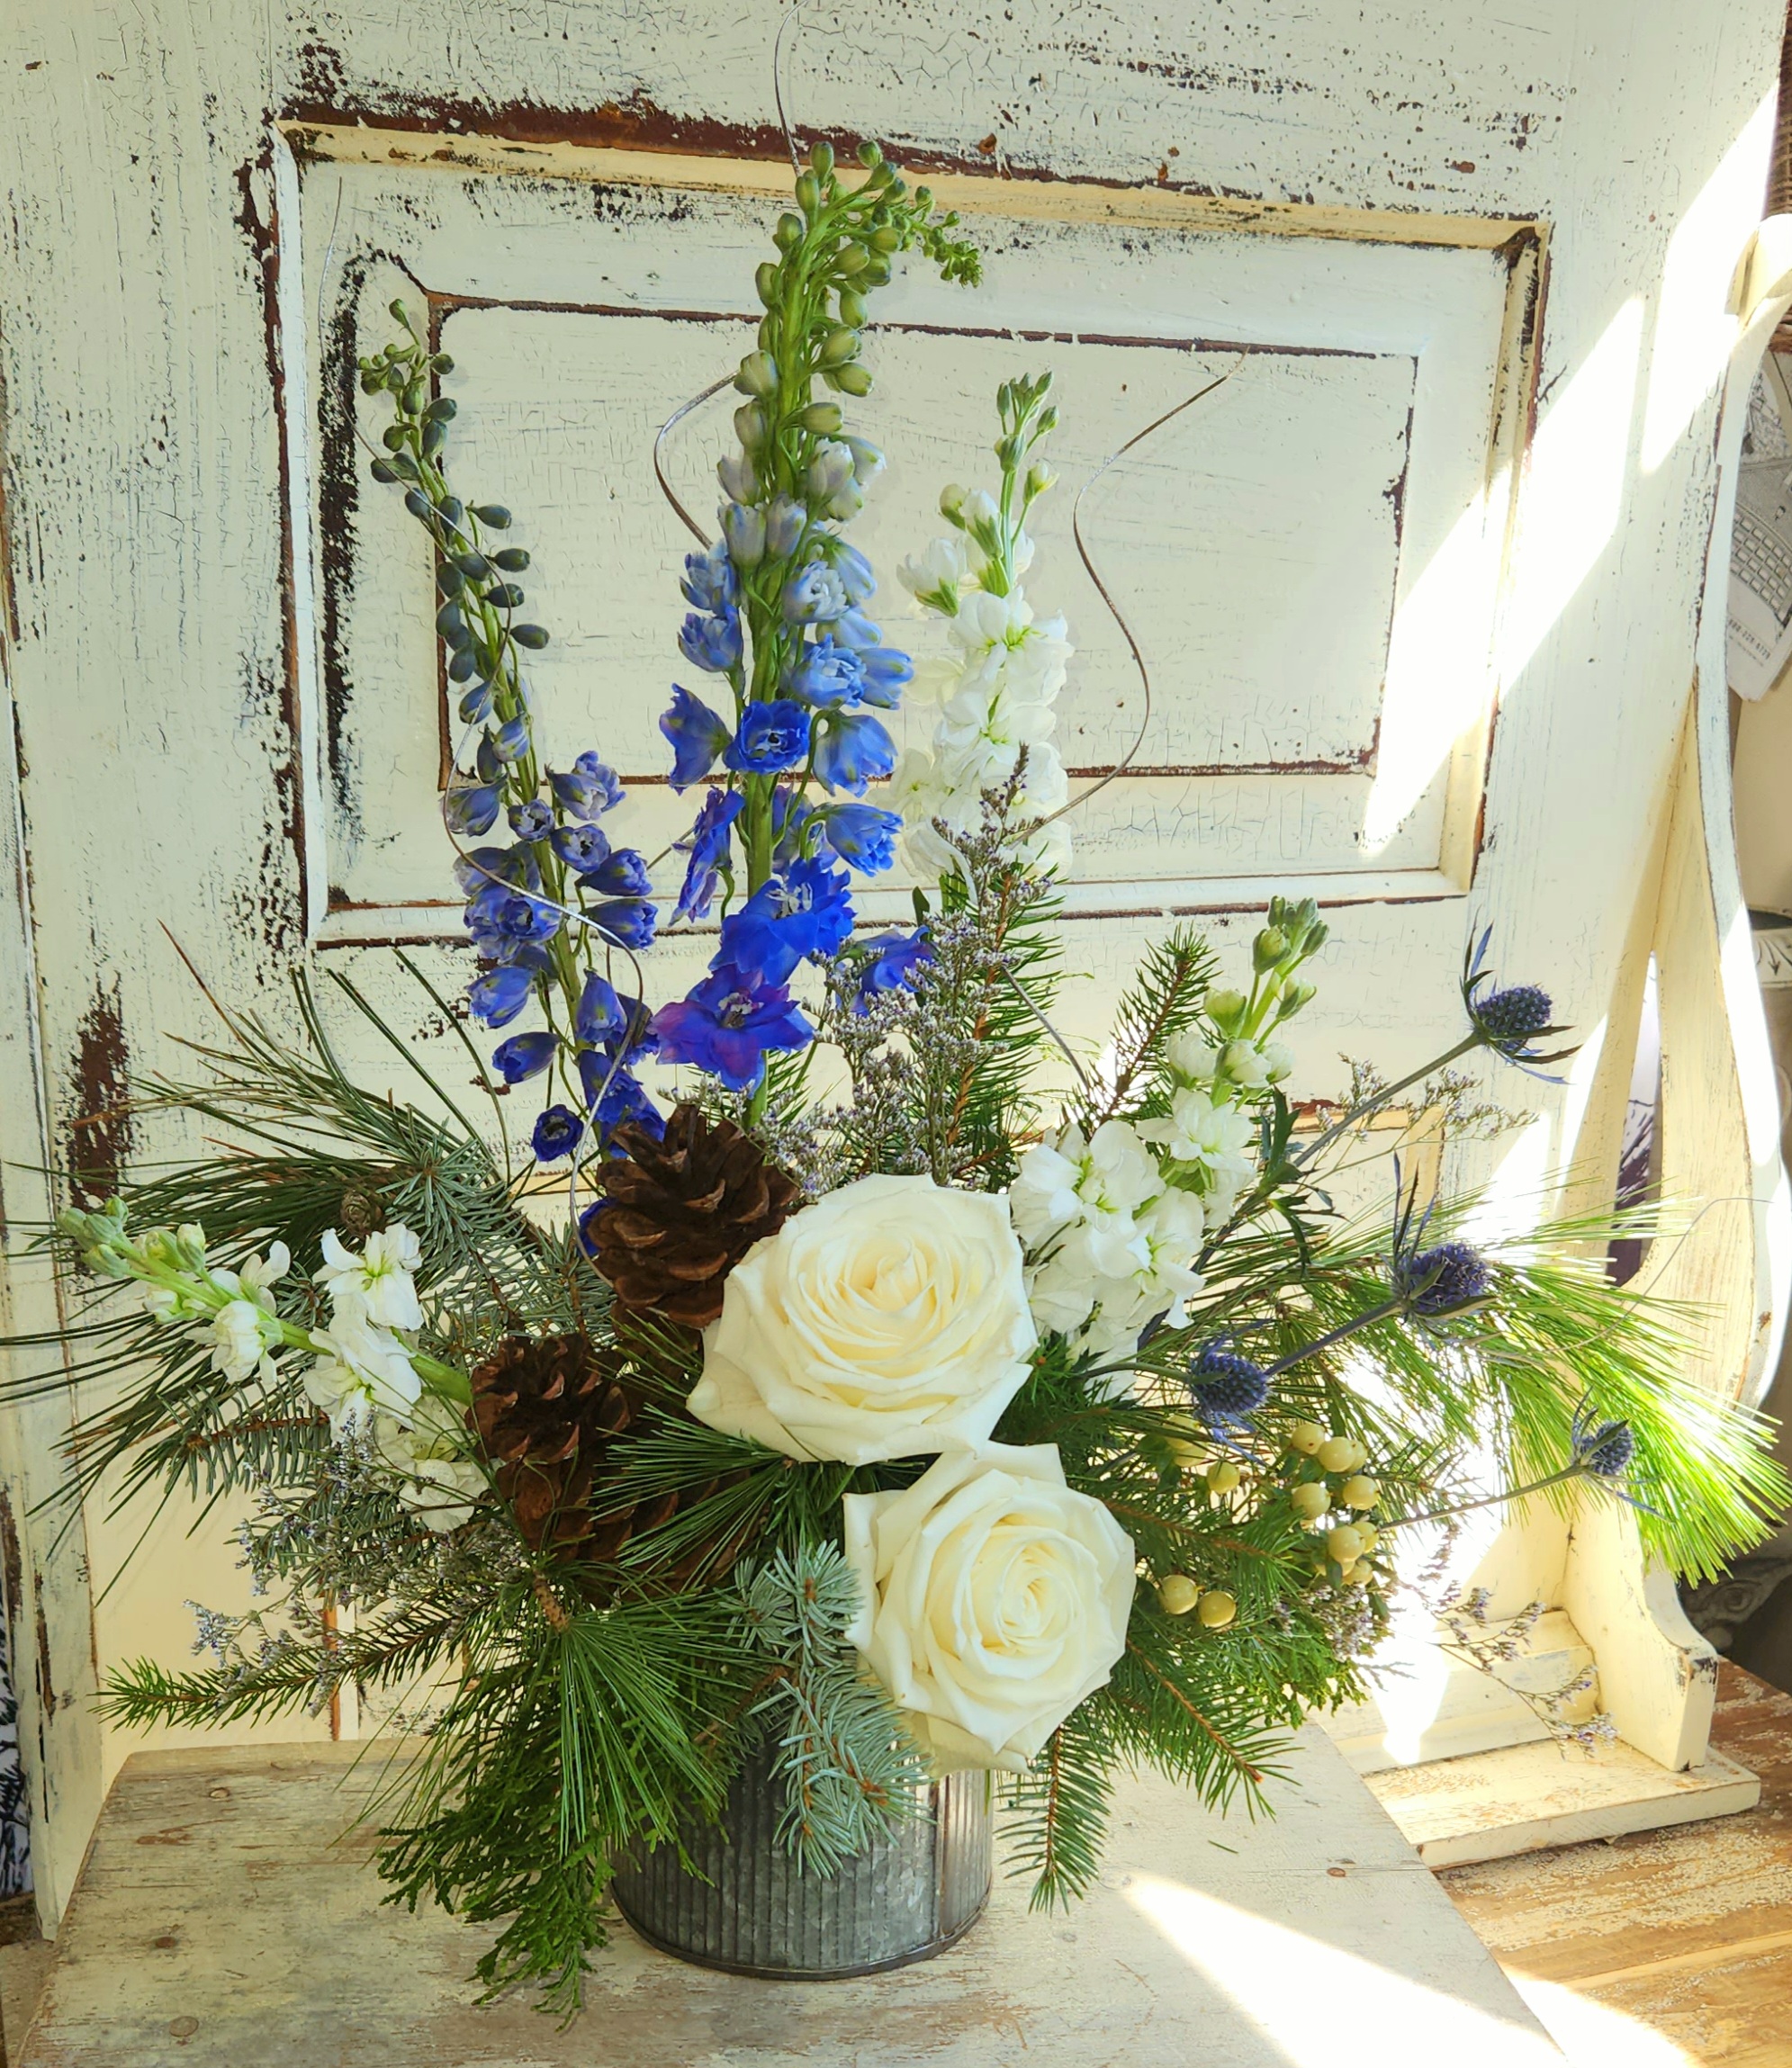 Industrial, rustic metal container with blue and white floral accents and evergreens